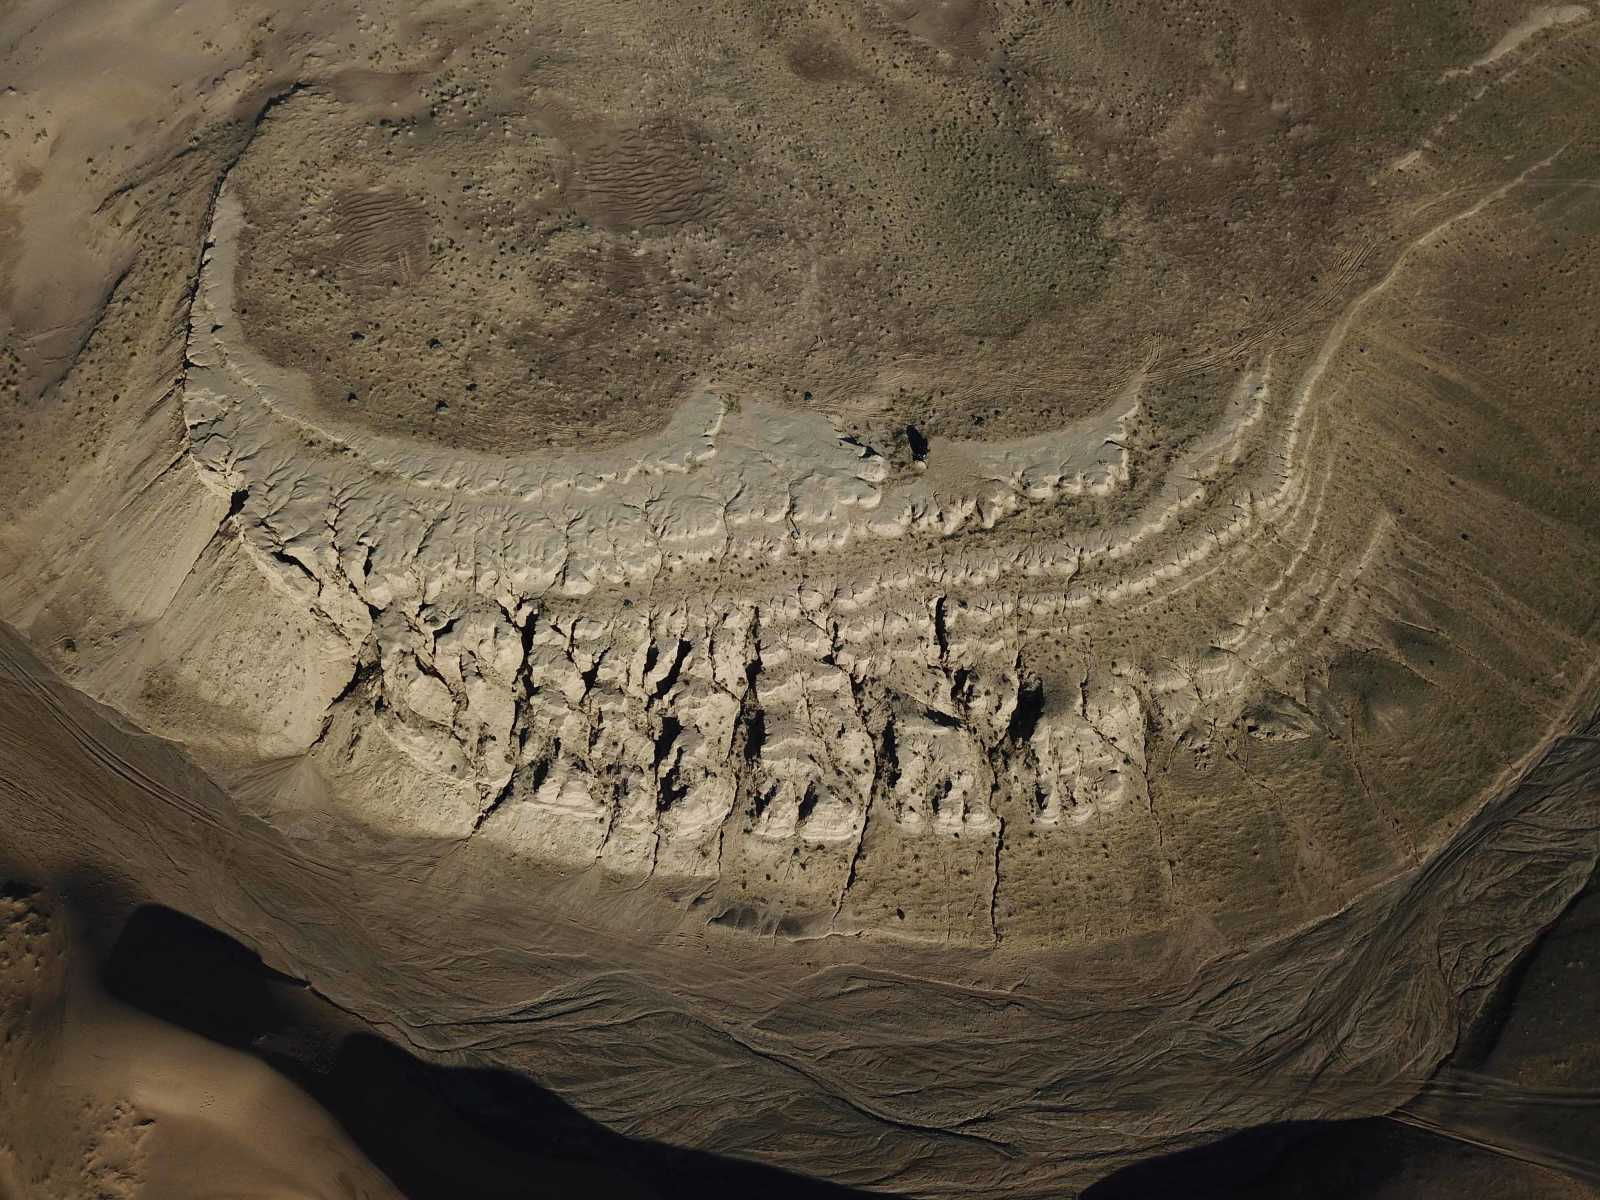 Drone view of a rock formations